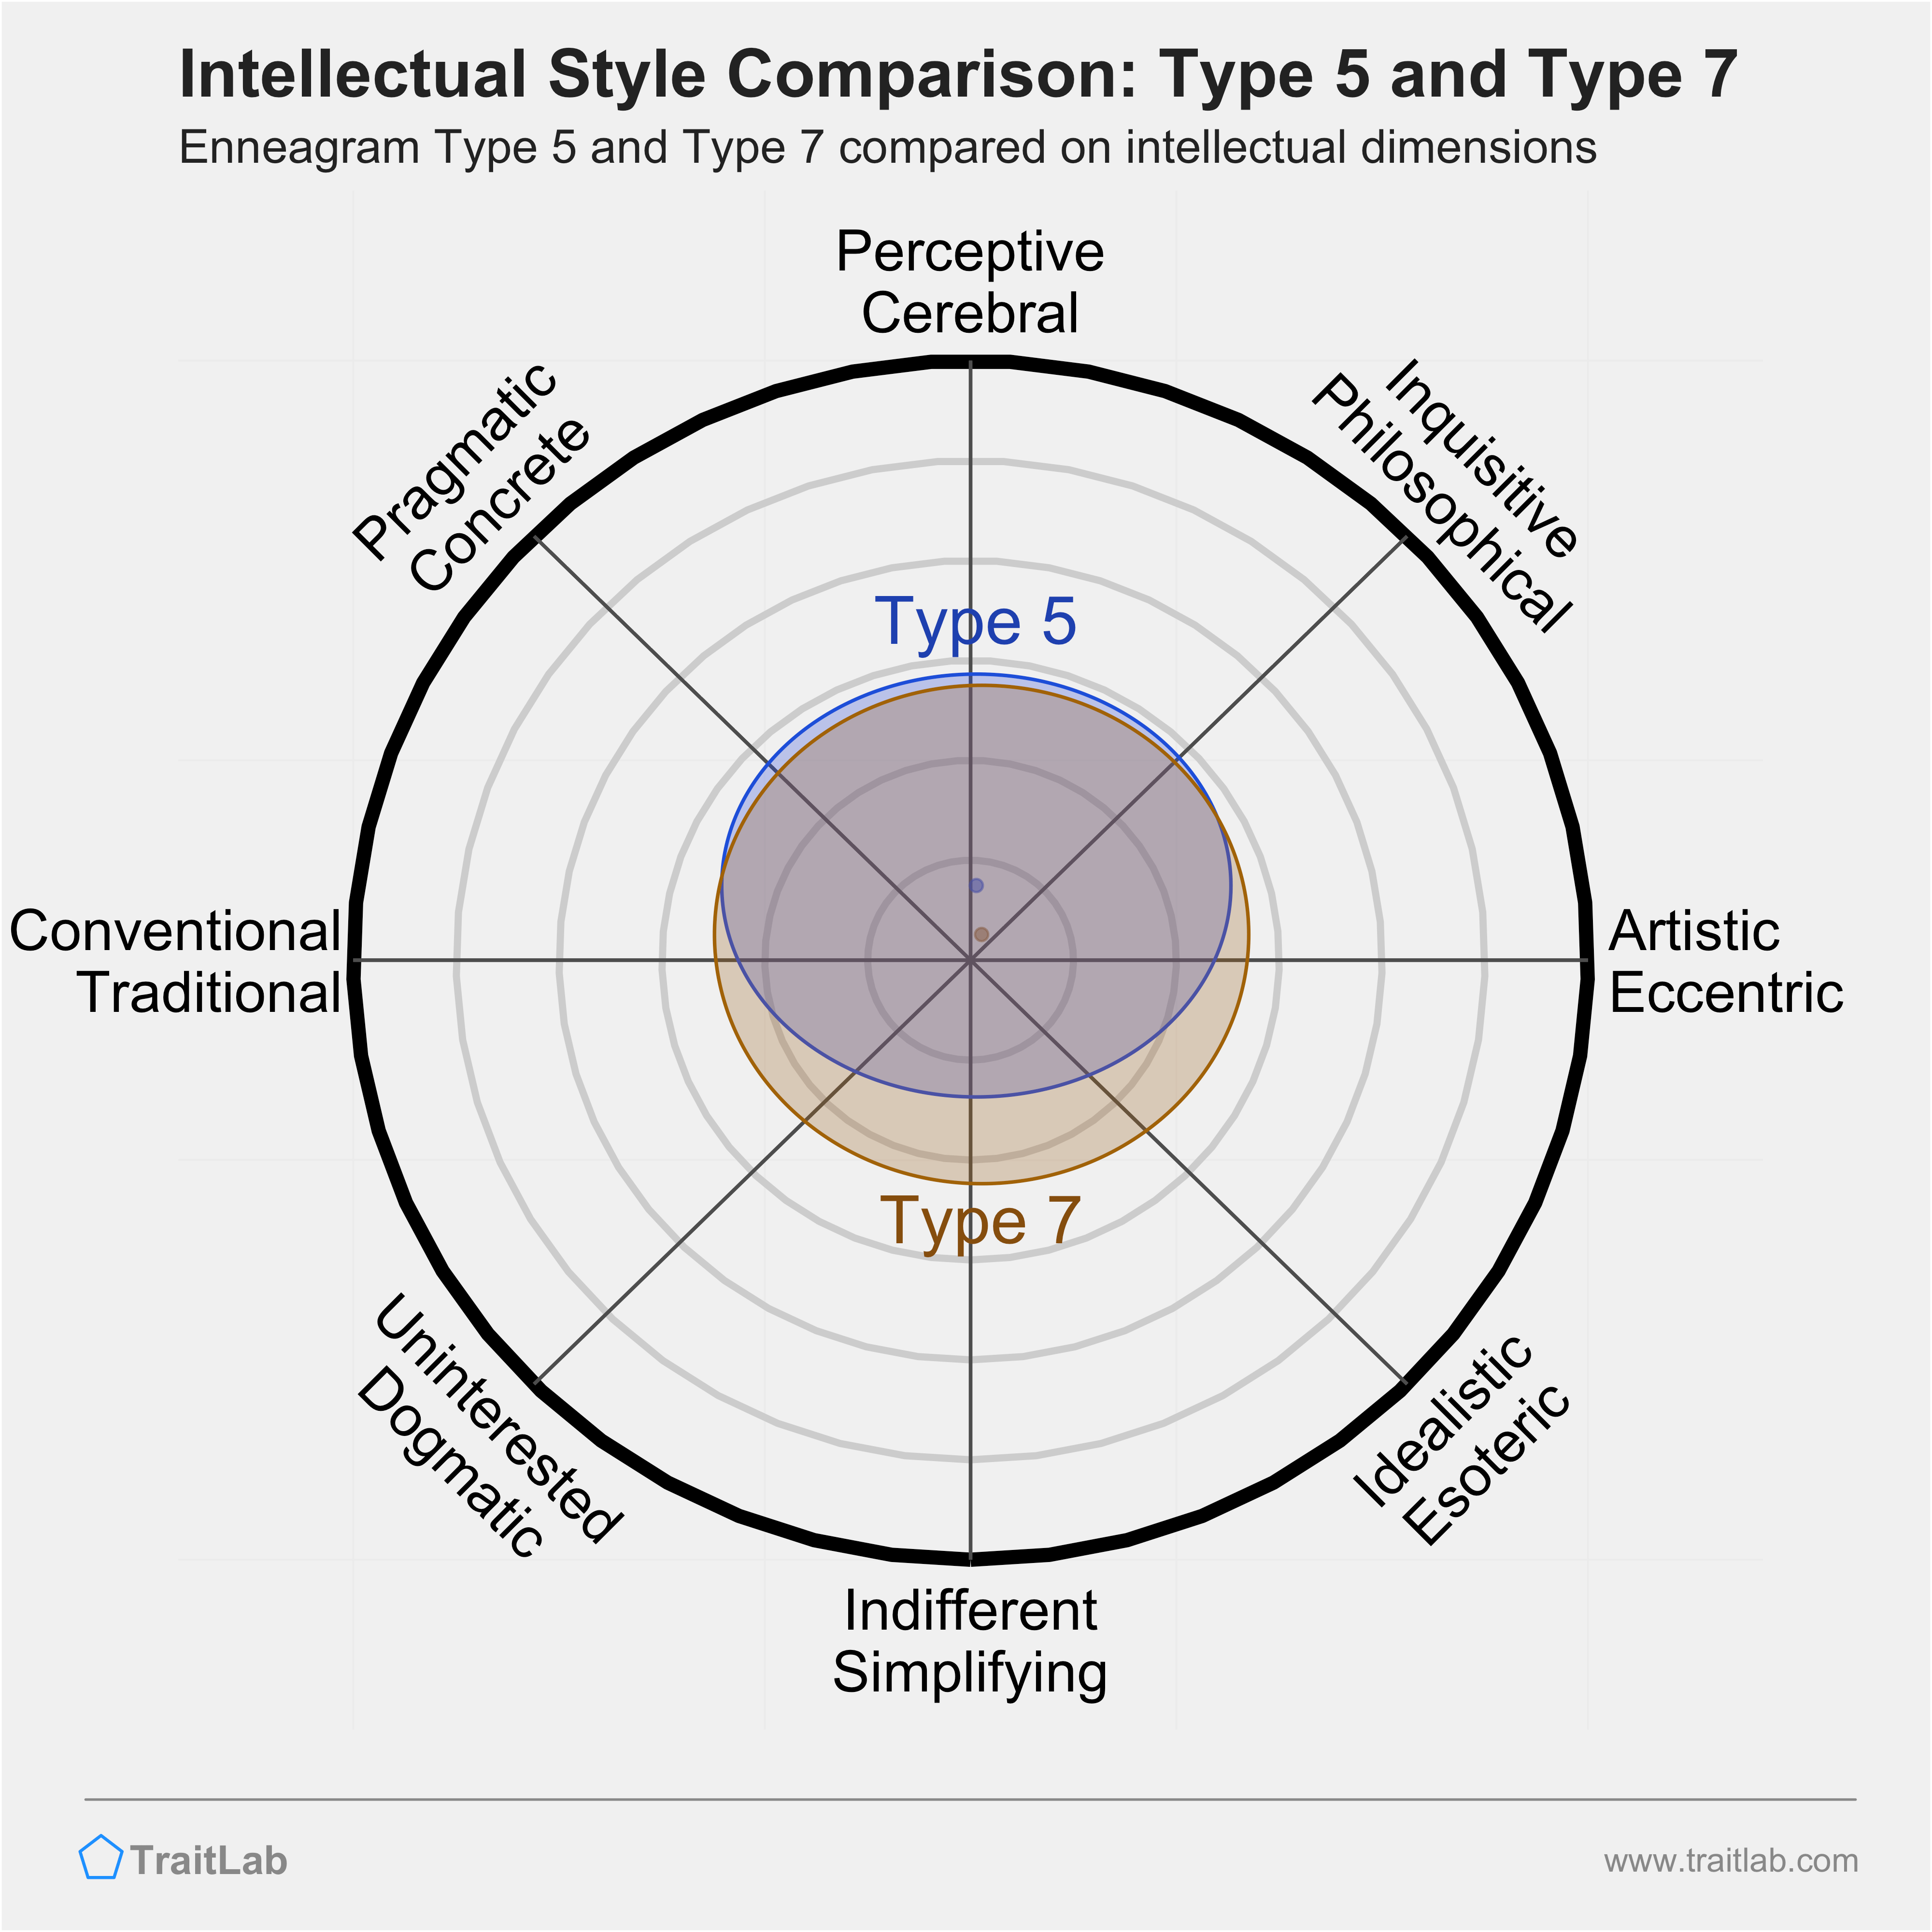 Type 5 and Type 7 comparison across intellectual dimensions